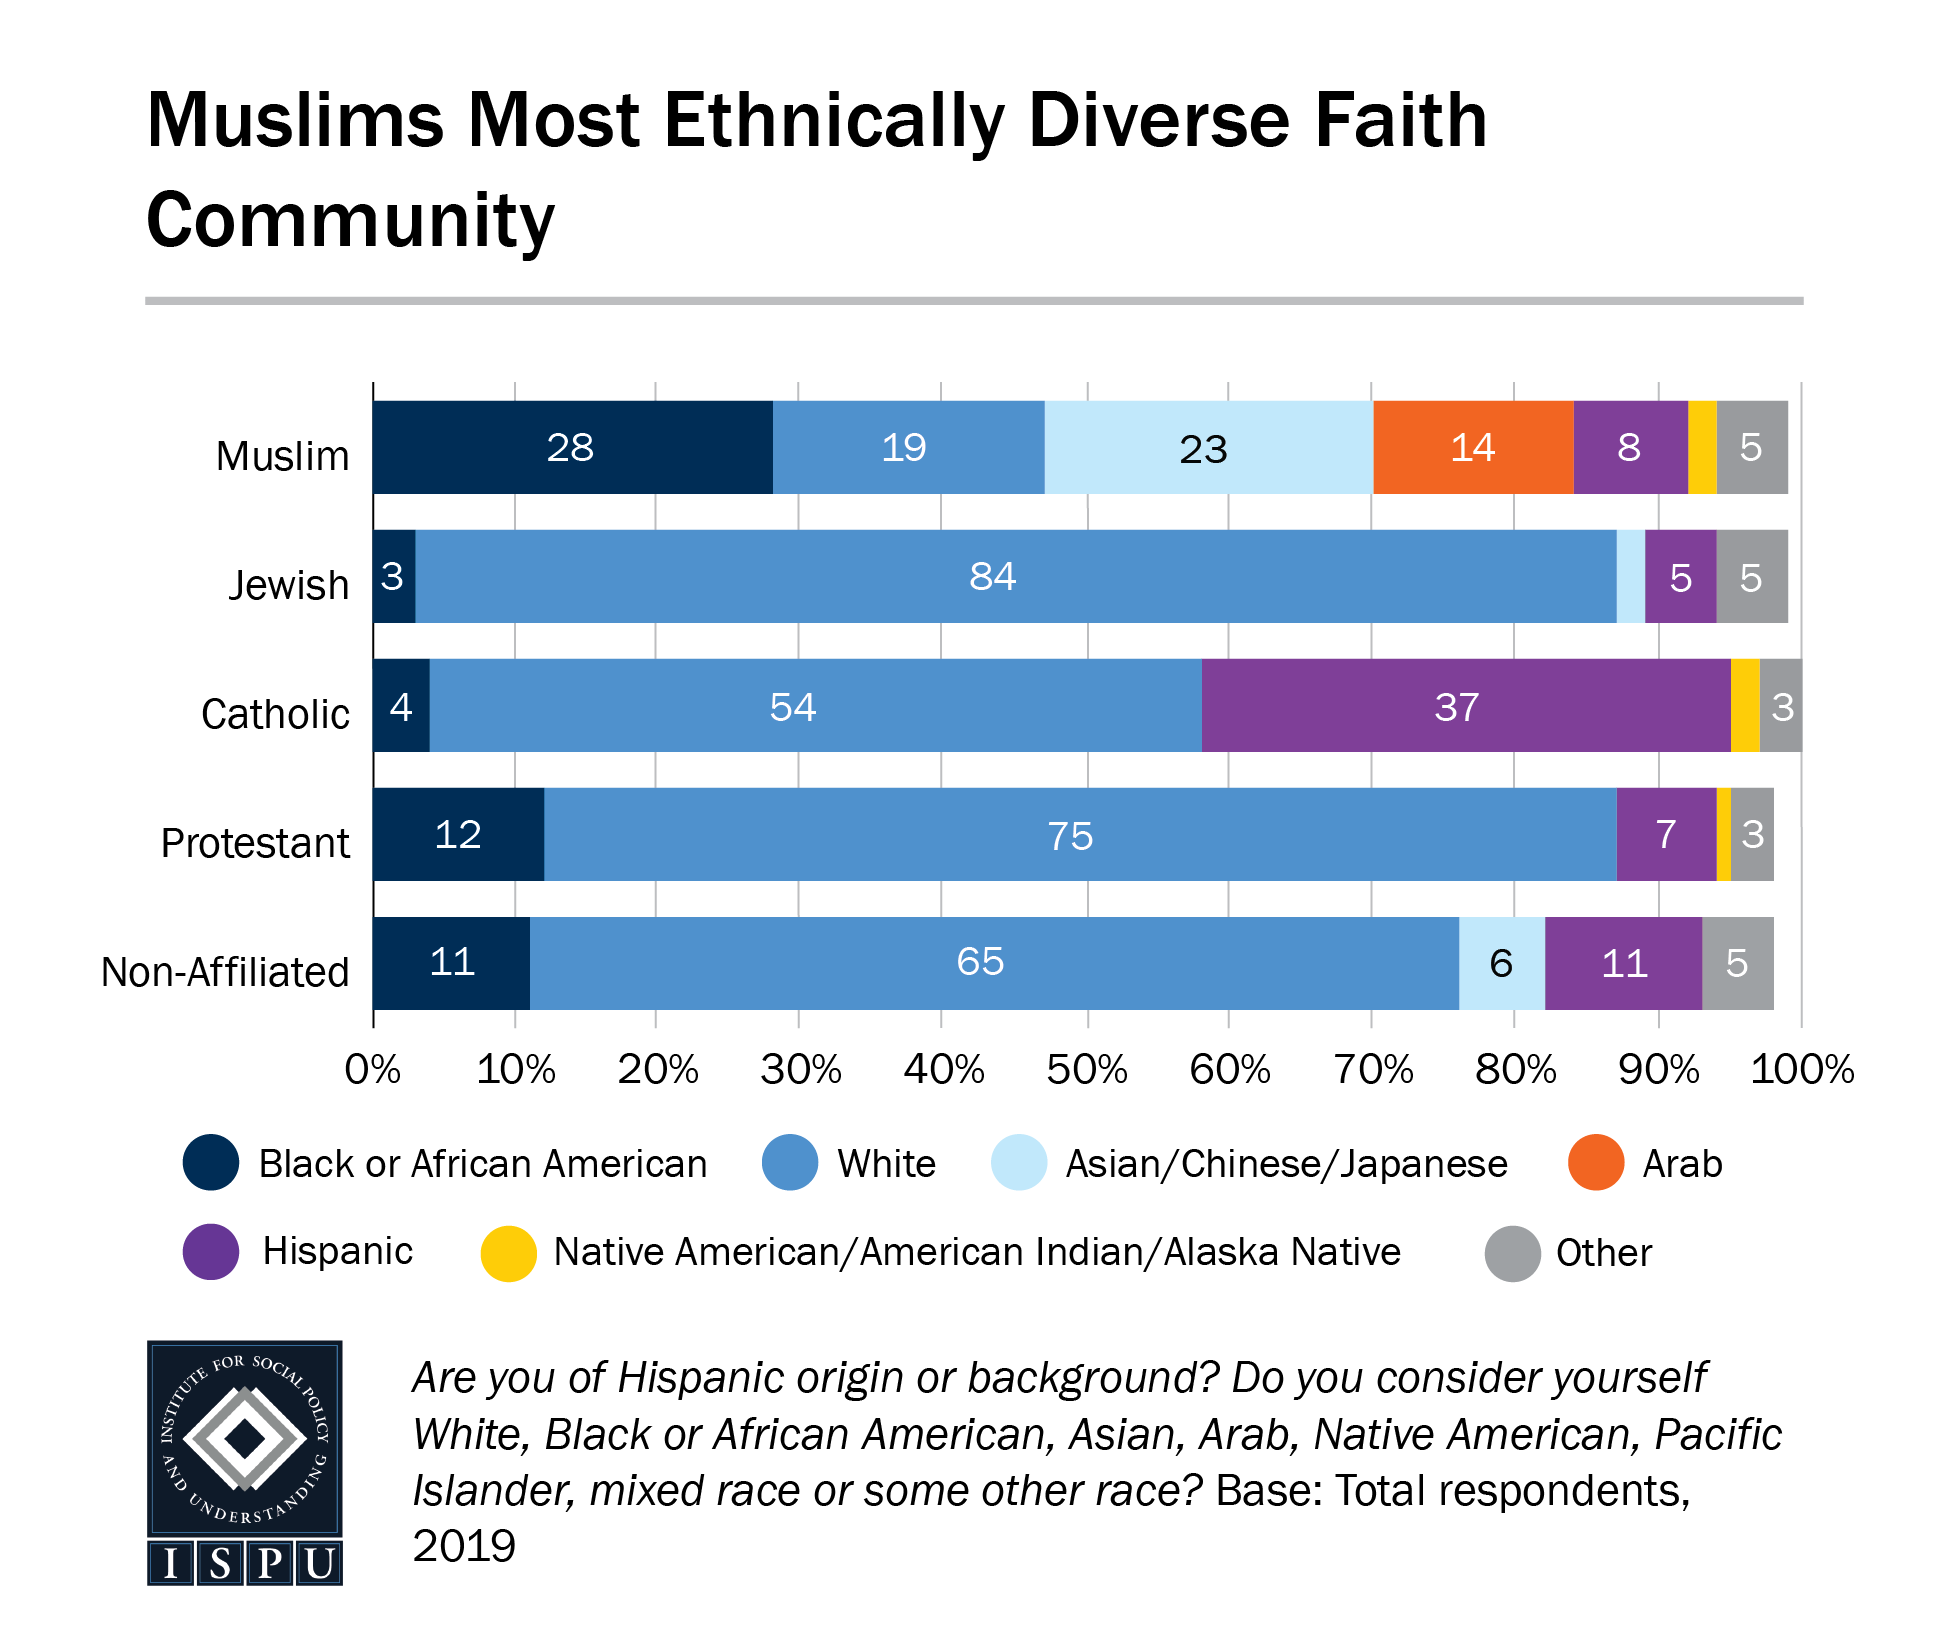 A bar graph showing that Muslims are the most ethnically diverse faith community in the U.S.